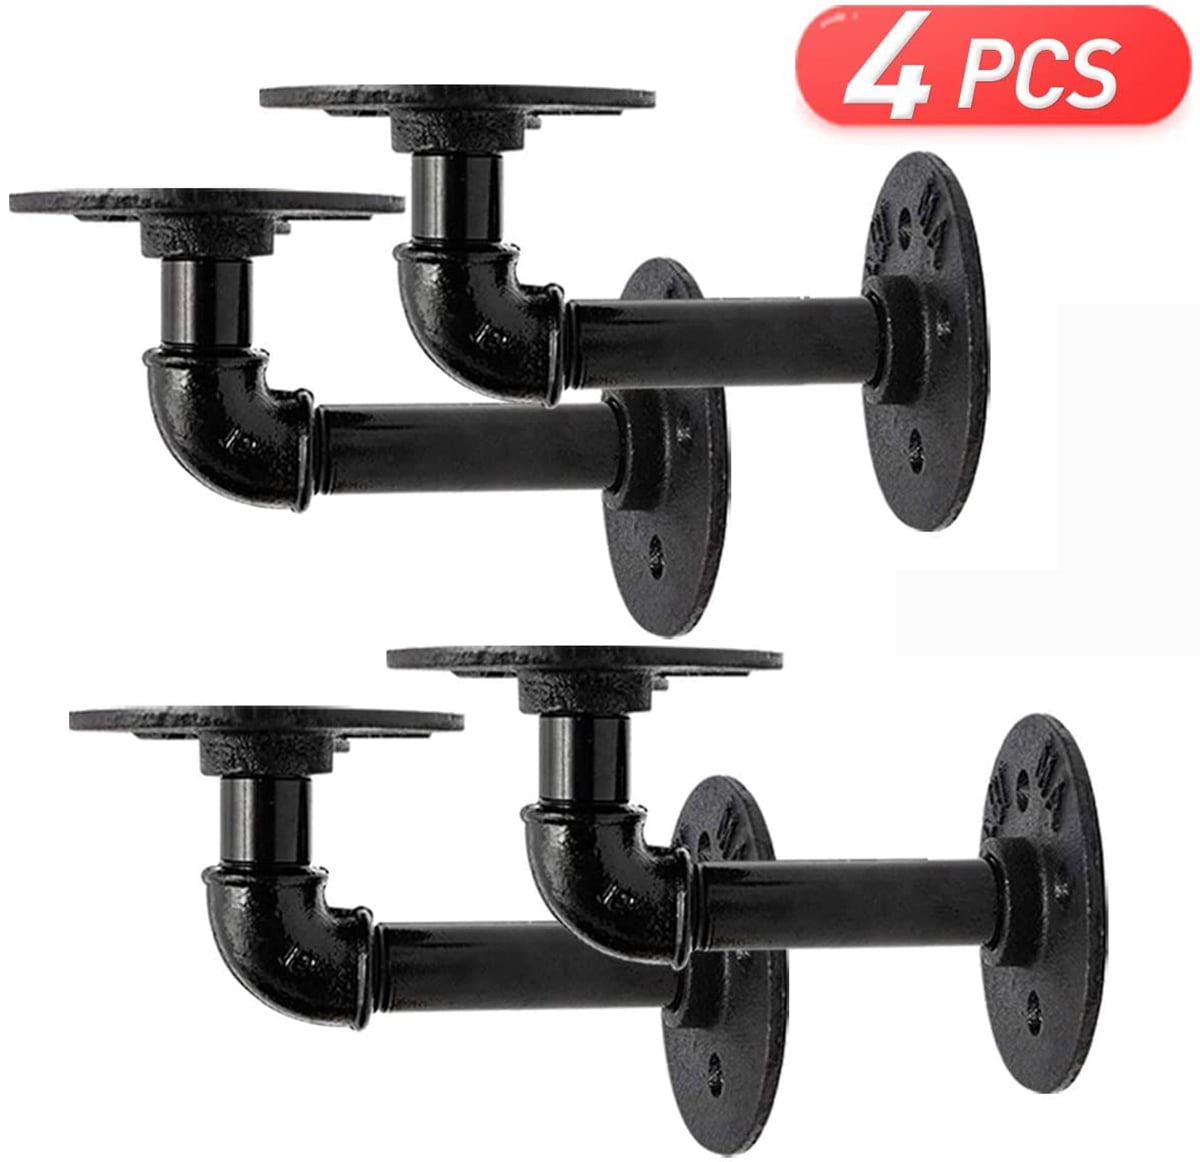 Wall Mounted DIY Bracket Industrial Pipe Shelf Brackets 12 inch Set of 4 Rustic Floating Shelf Brackets with Iron Fittings Garment Rack Hardware Flanges and Pipes for Vintage Furniture Decor